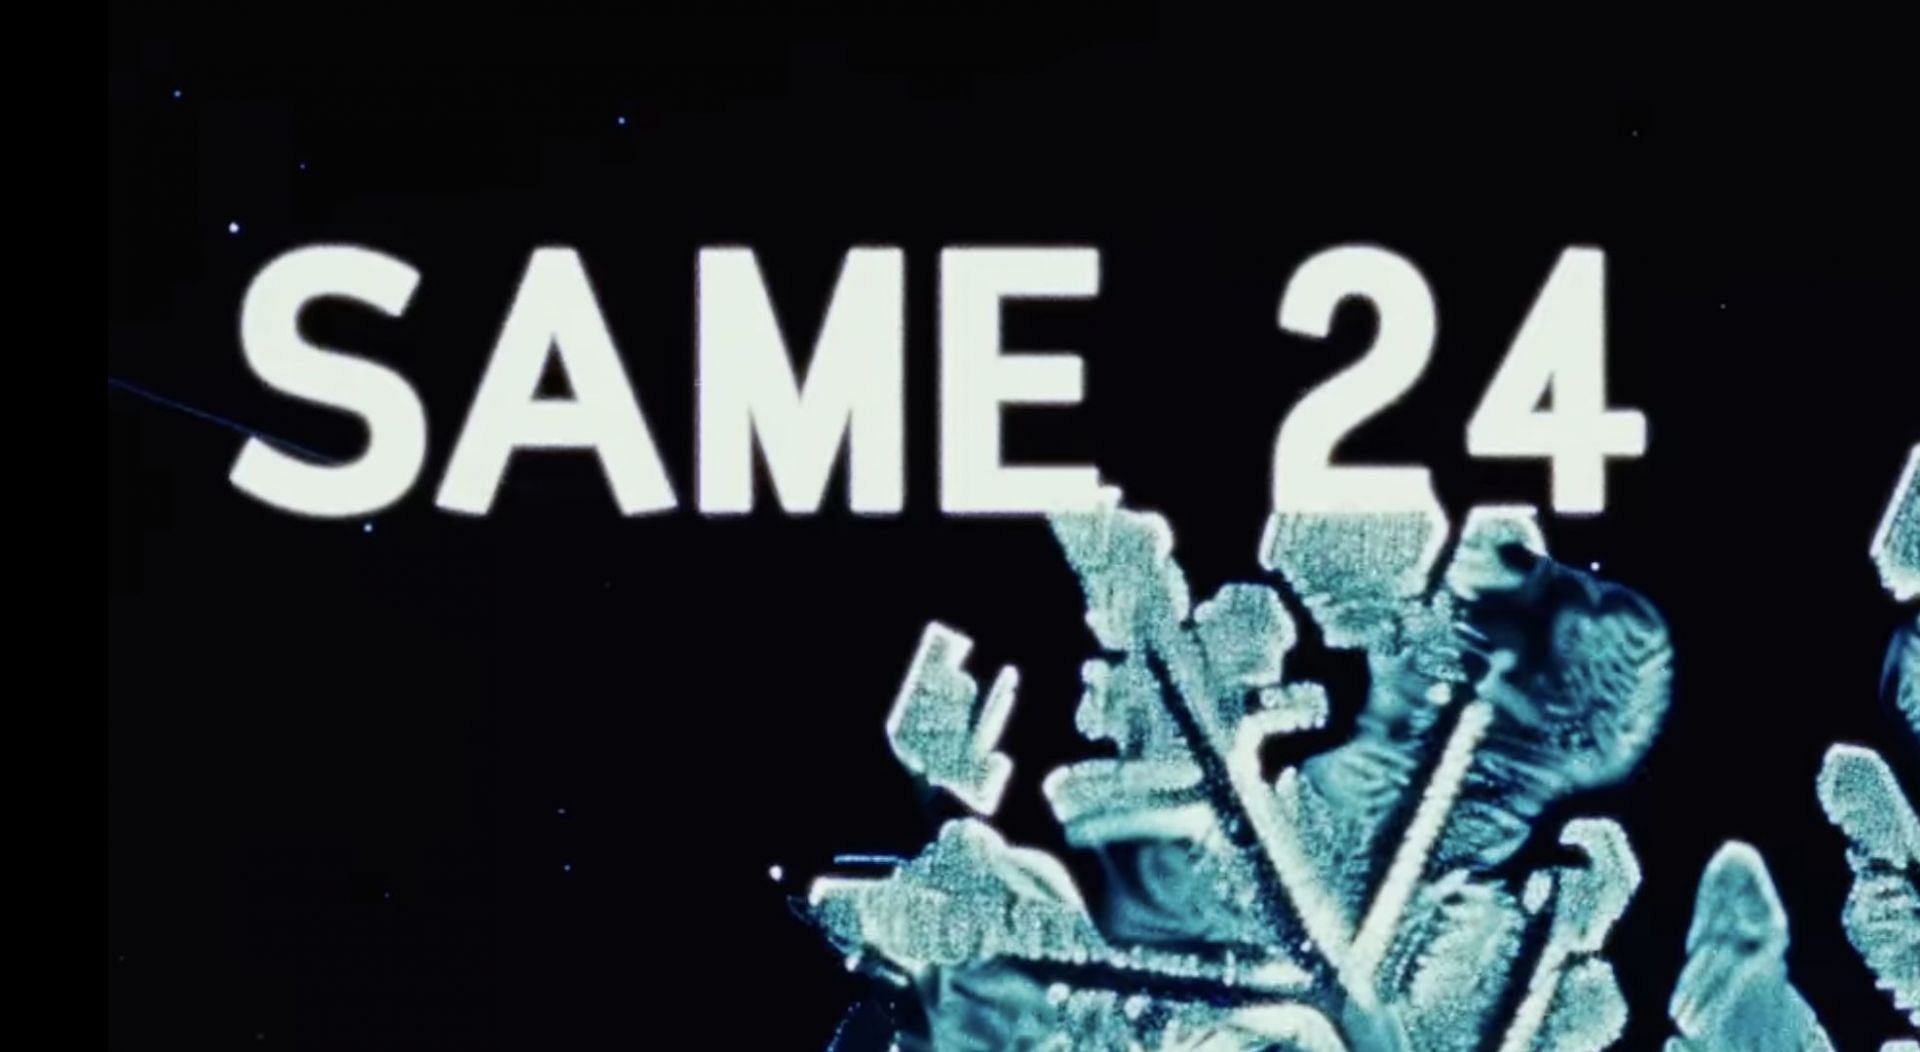 A still captured from the &quot;Same 24&quot; Music Video (Image via YouTube/@fivioforeign)